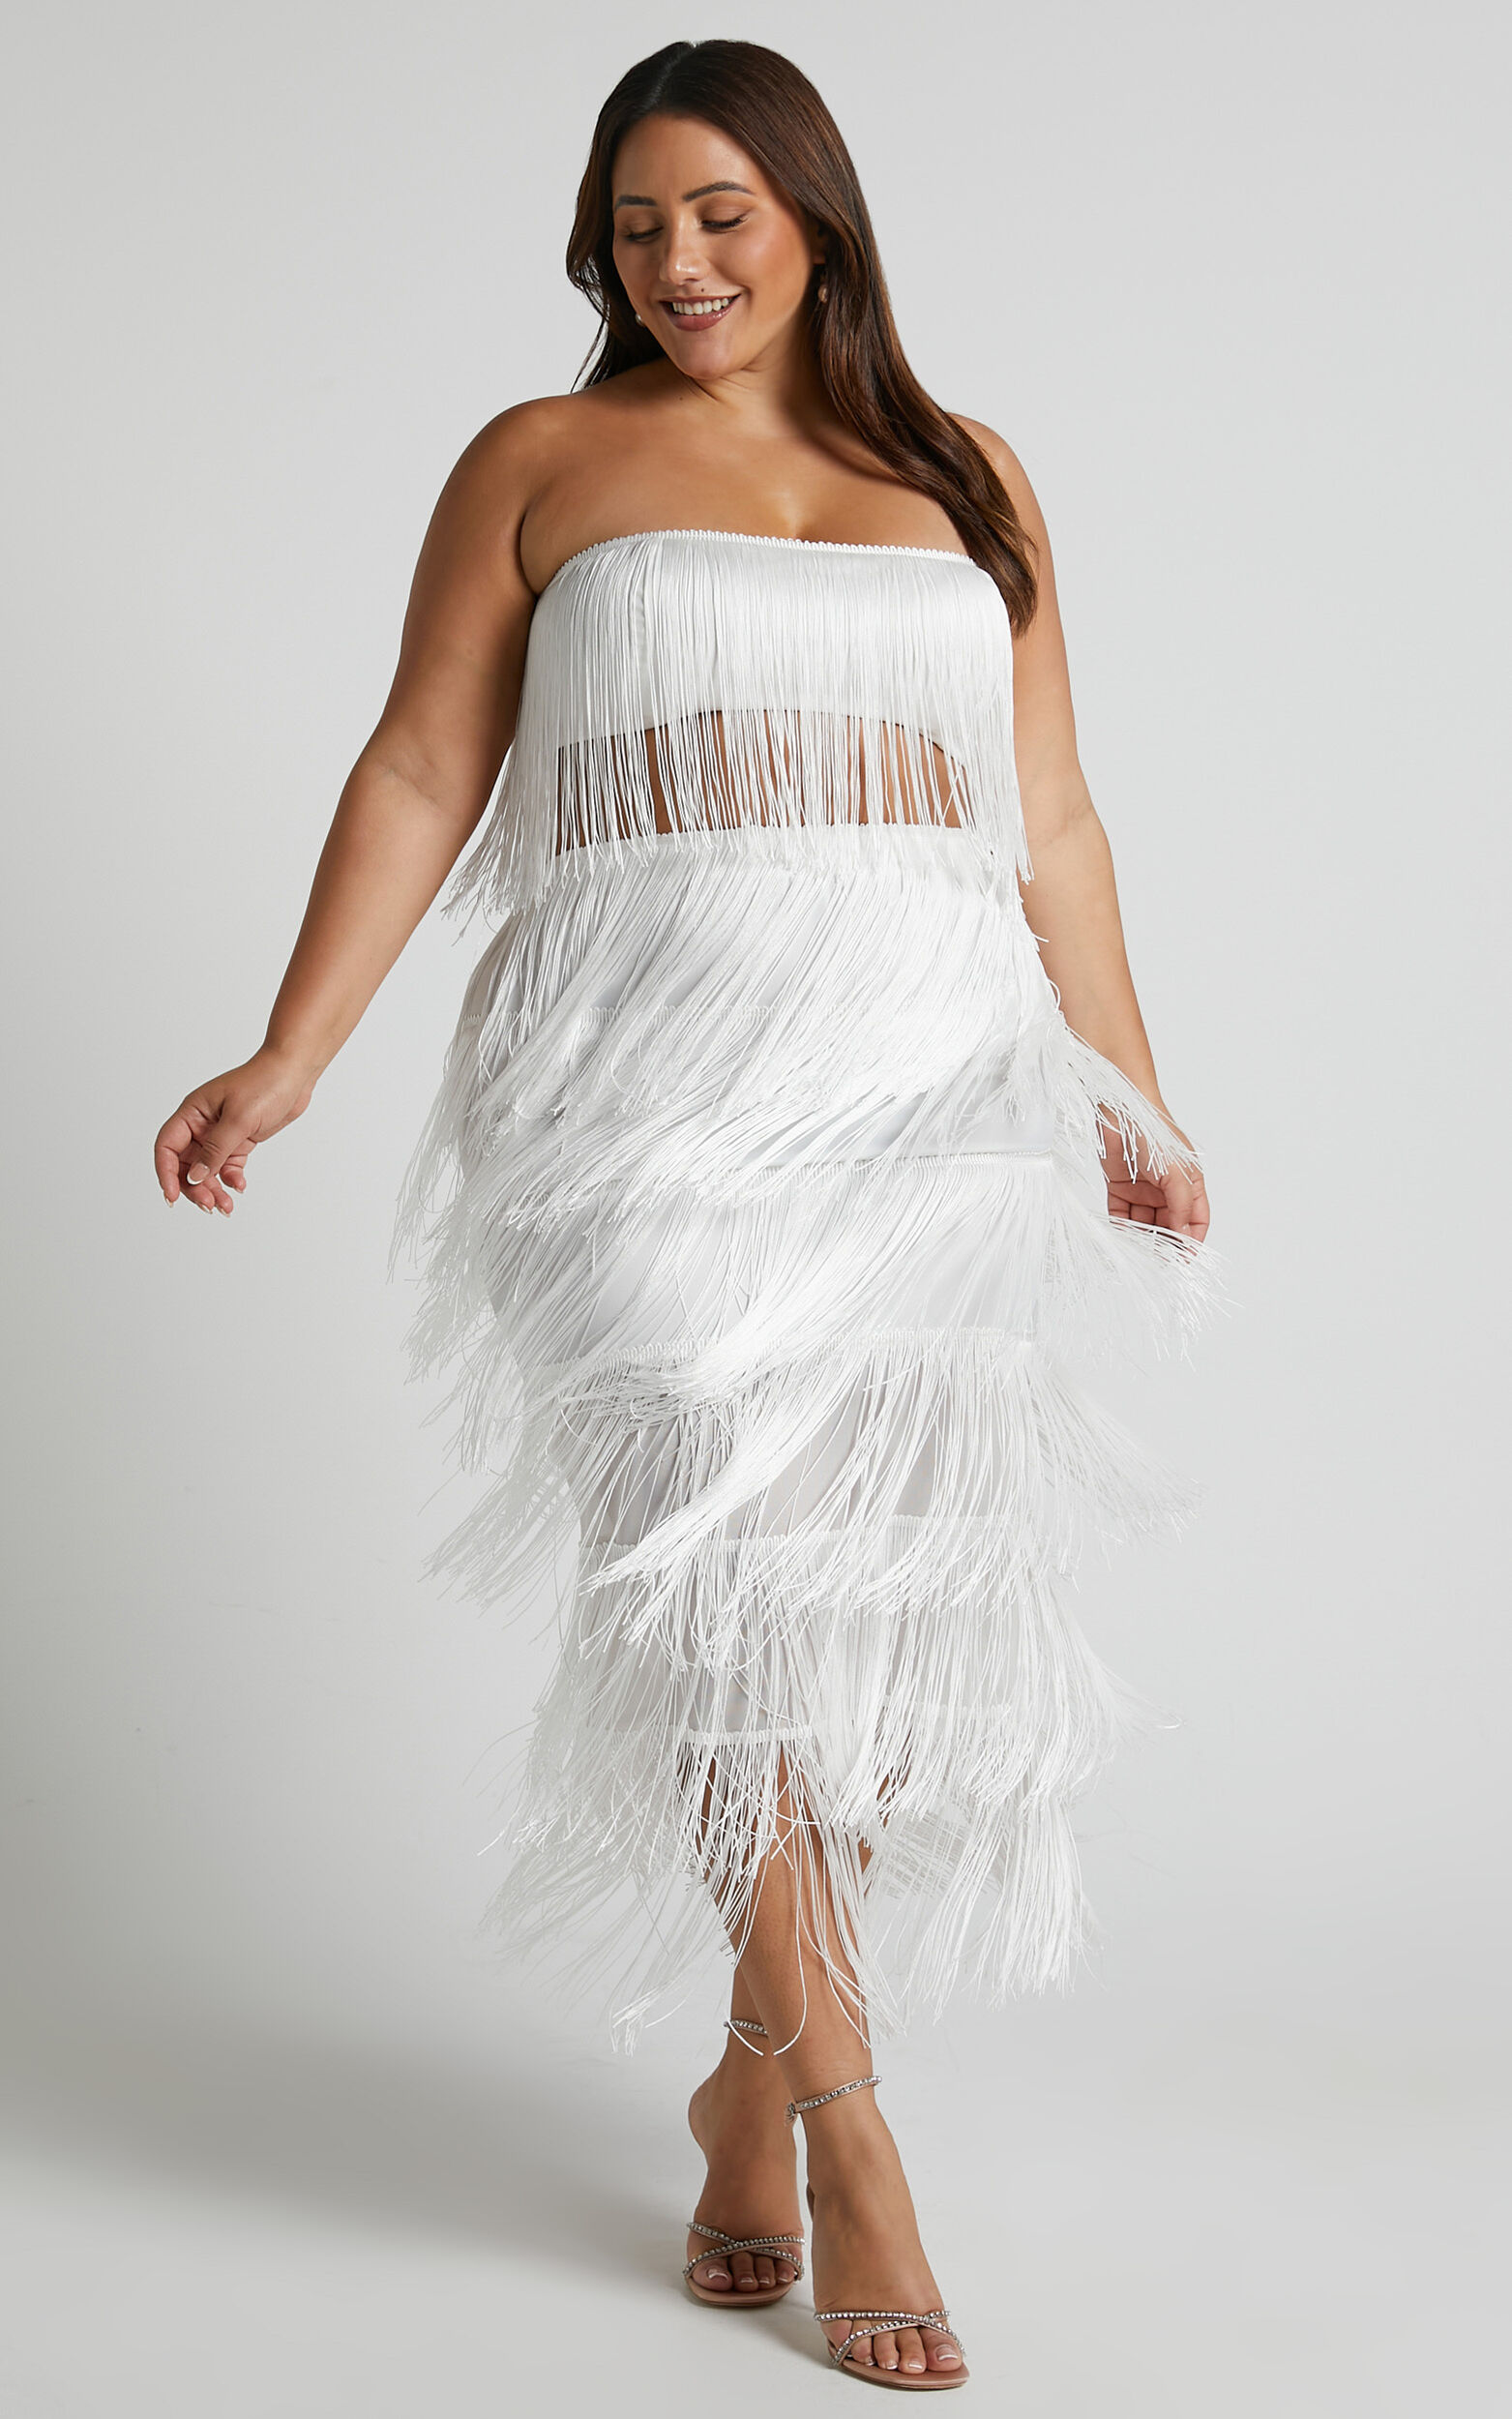 Draping Fringe Camisole and Skirt with matching mesh bandeau and G